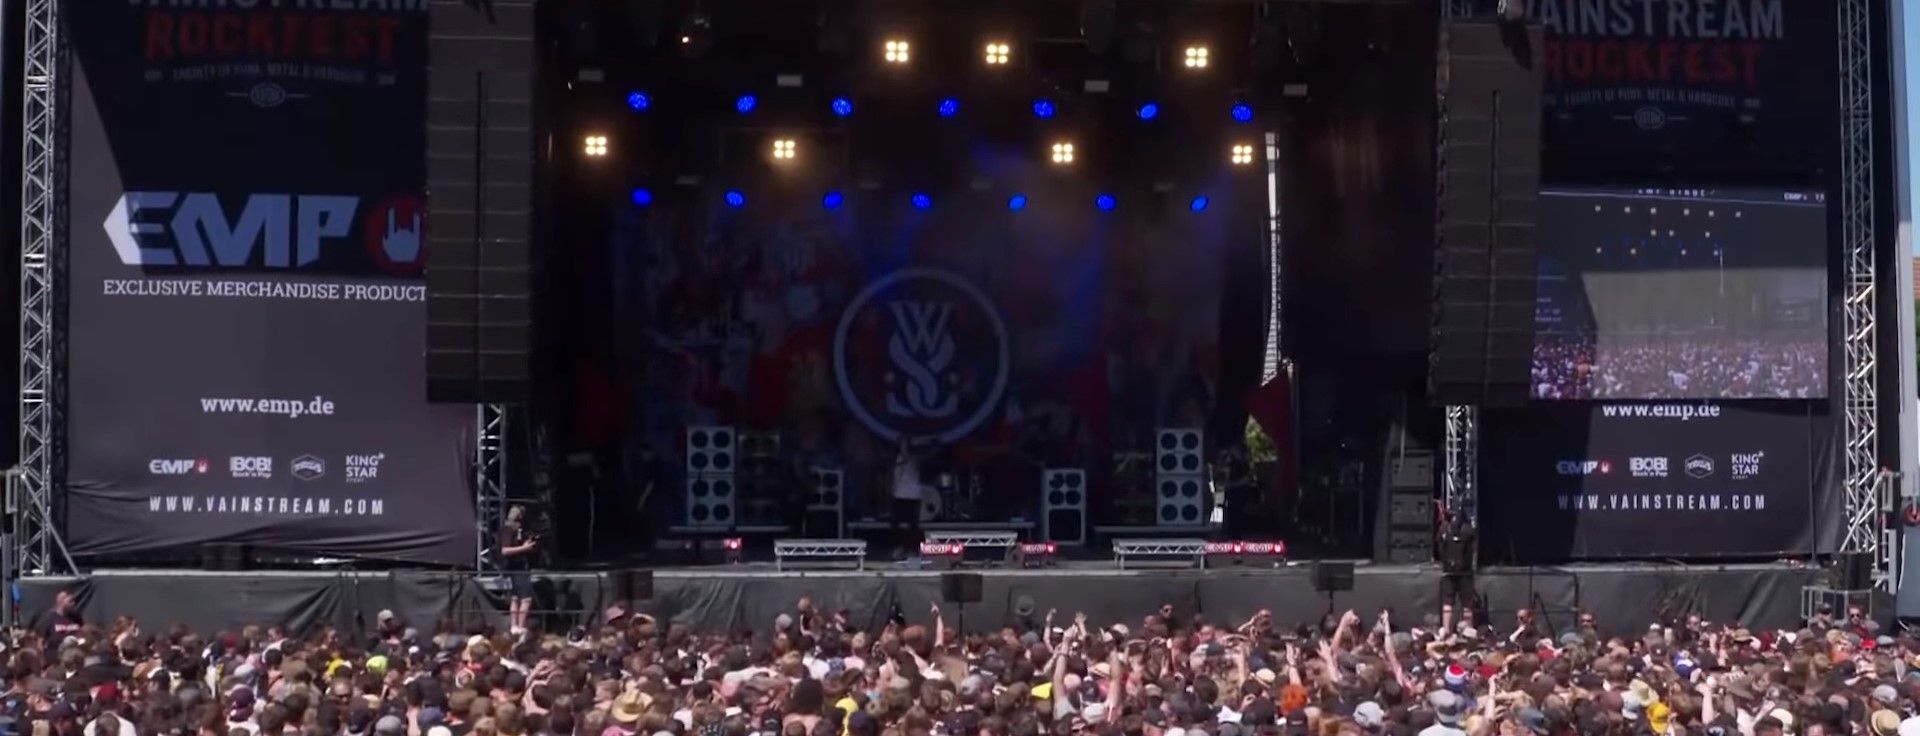 While She Sleeps - Four Walls (Live At Vainstream 2019)